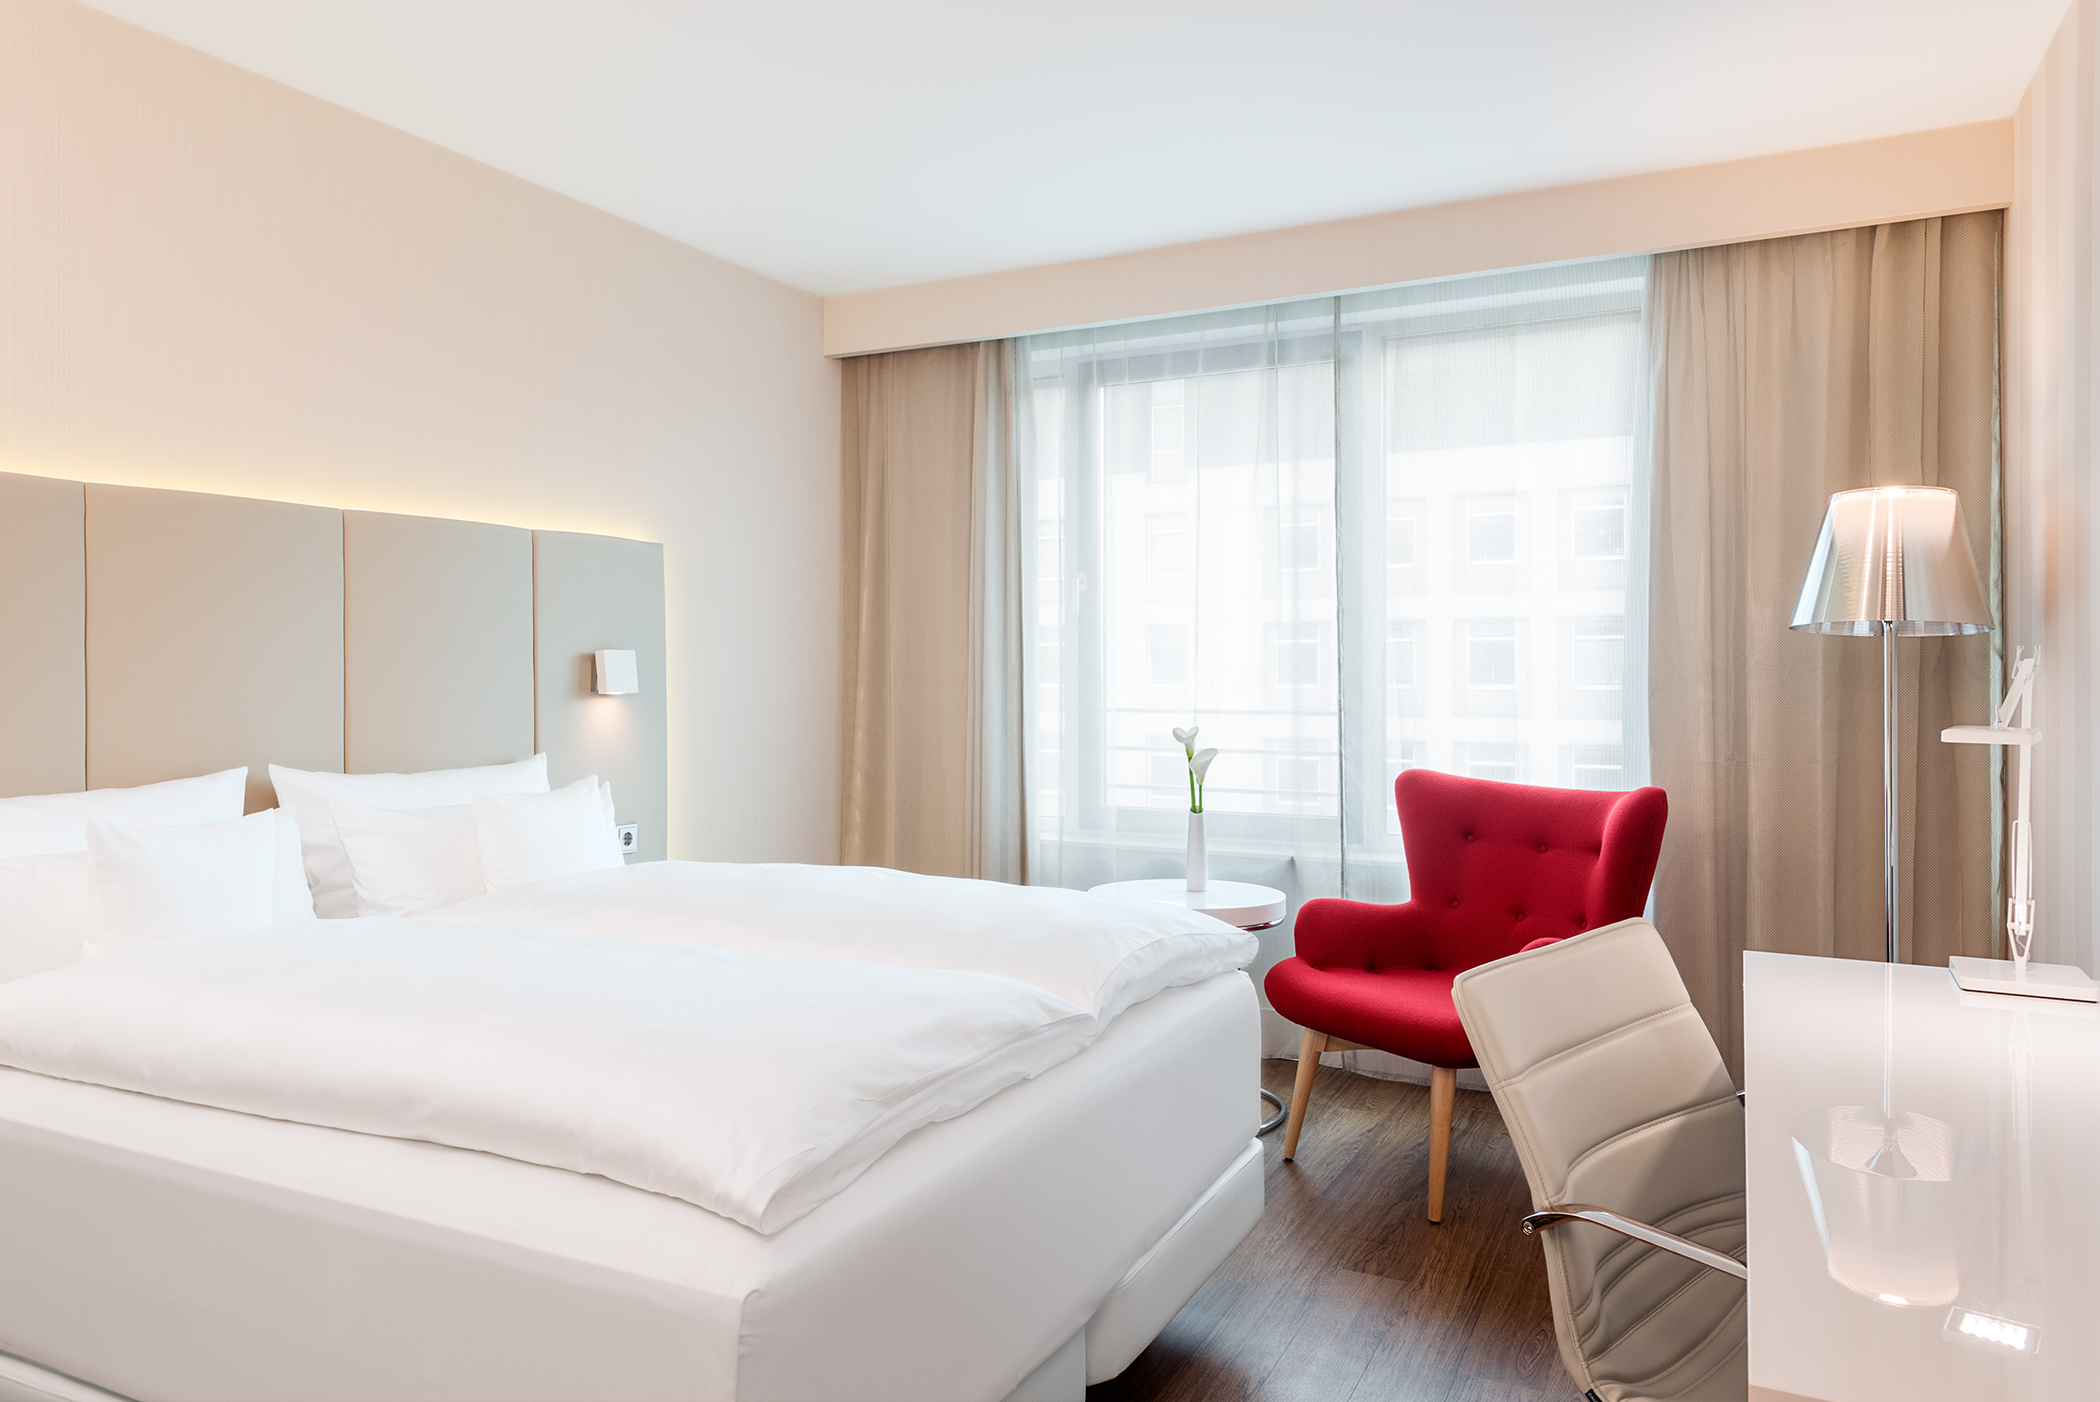 NH Collection Frankfurt City <br/>81.00 ew <br/> <a href='http://vakantieoplossing.nl/outpage/?id=42d02a709f129af77768acda19d1119f' target='_blank'>View Details</a>